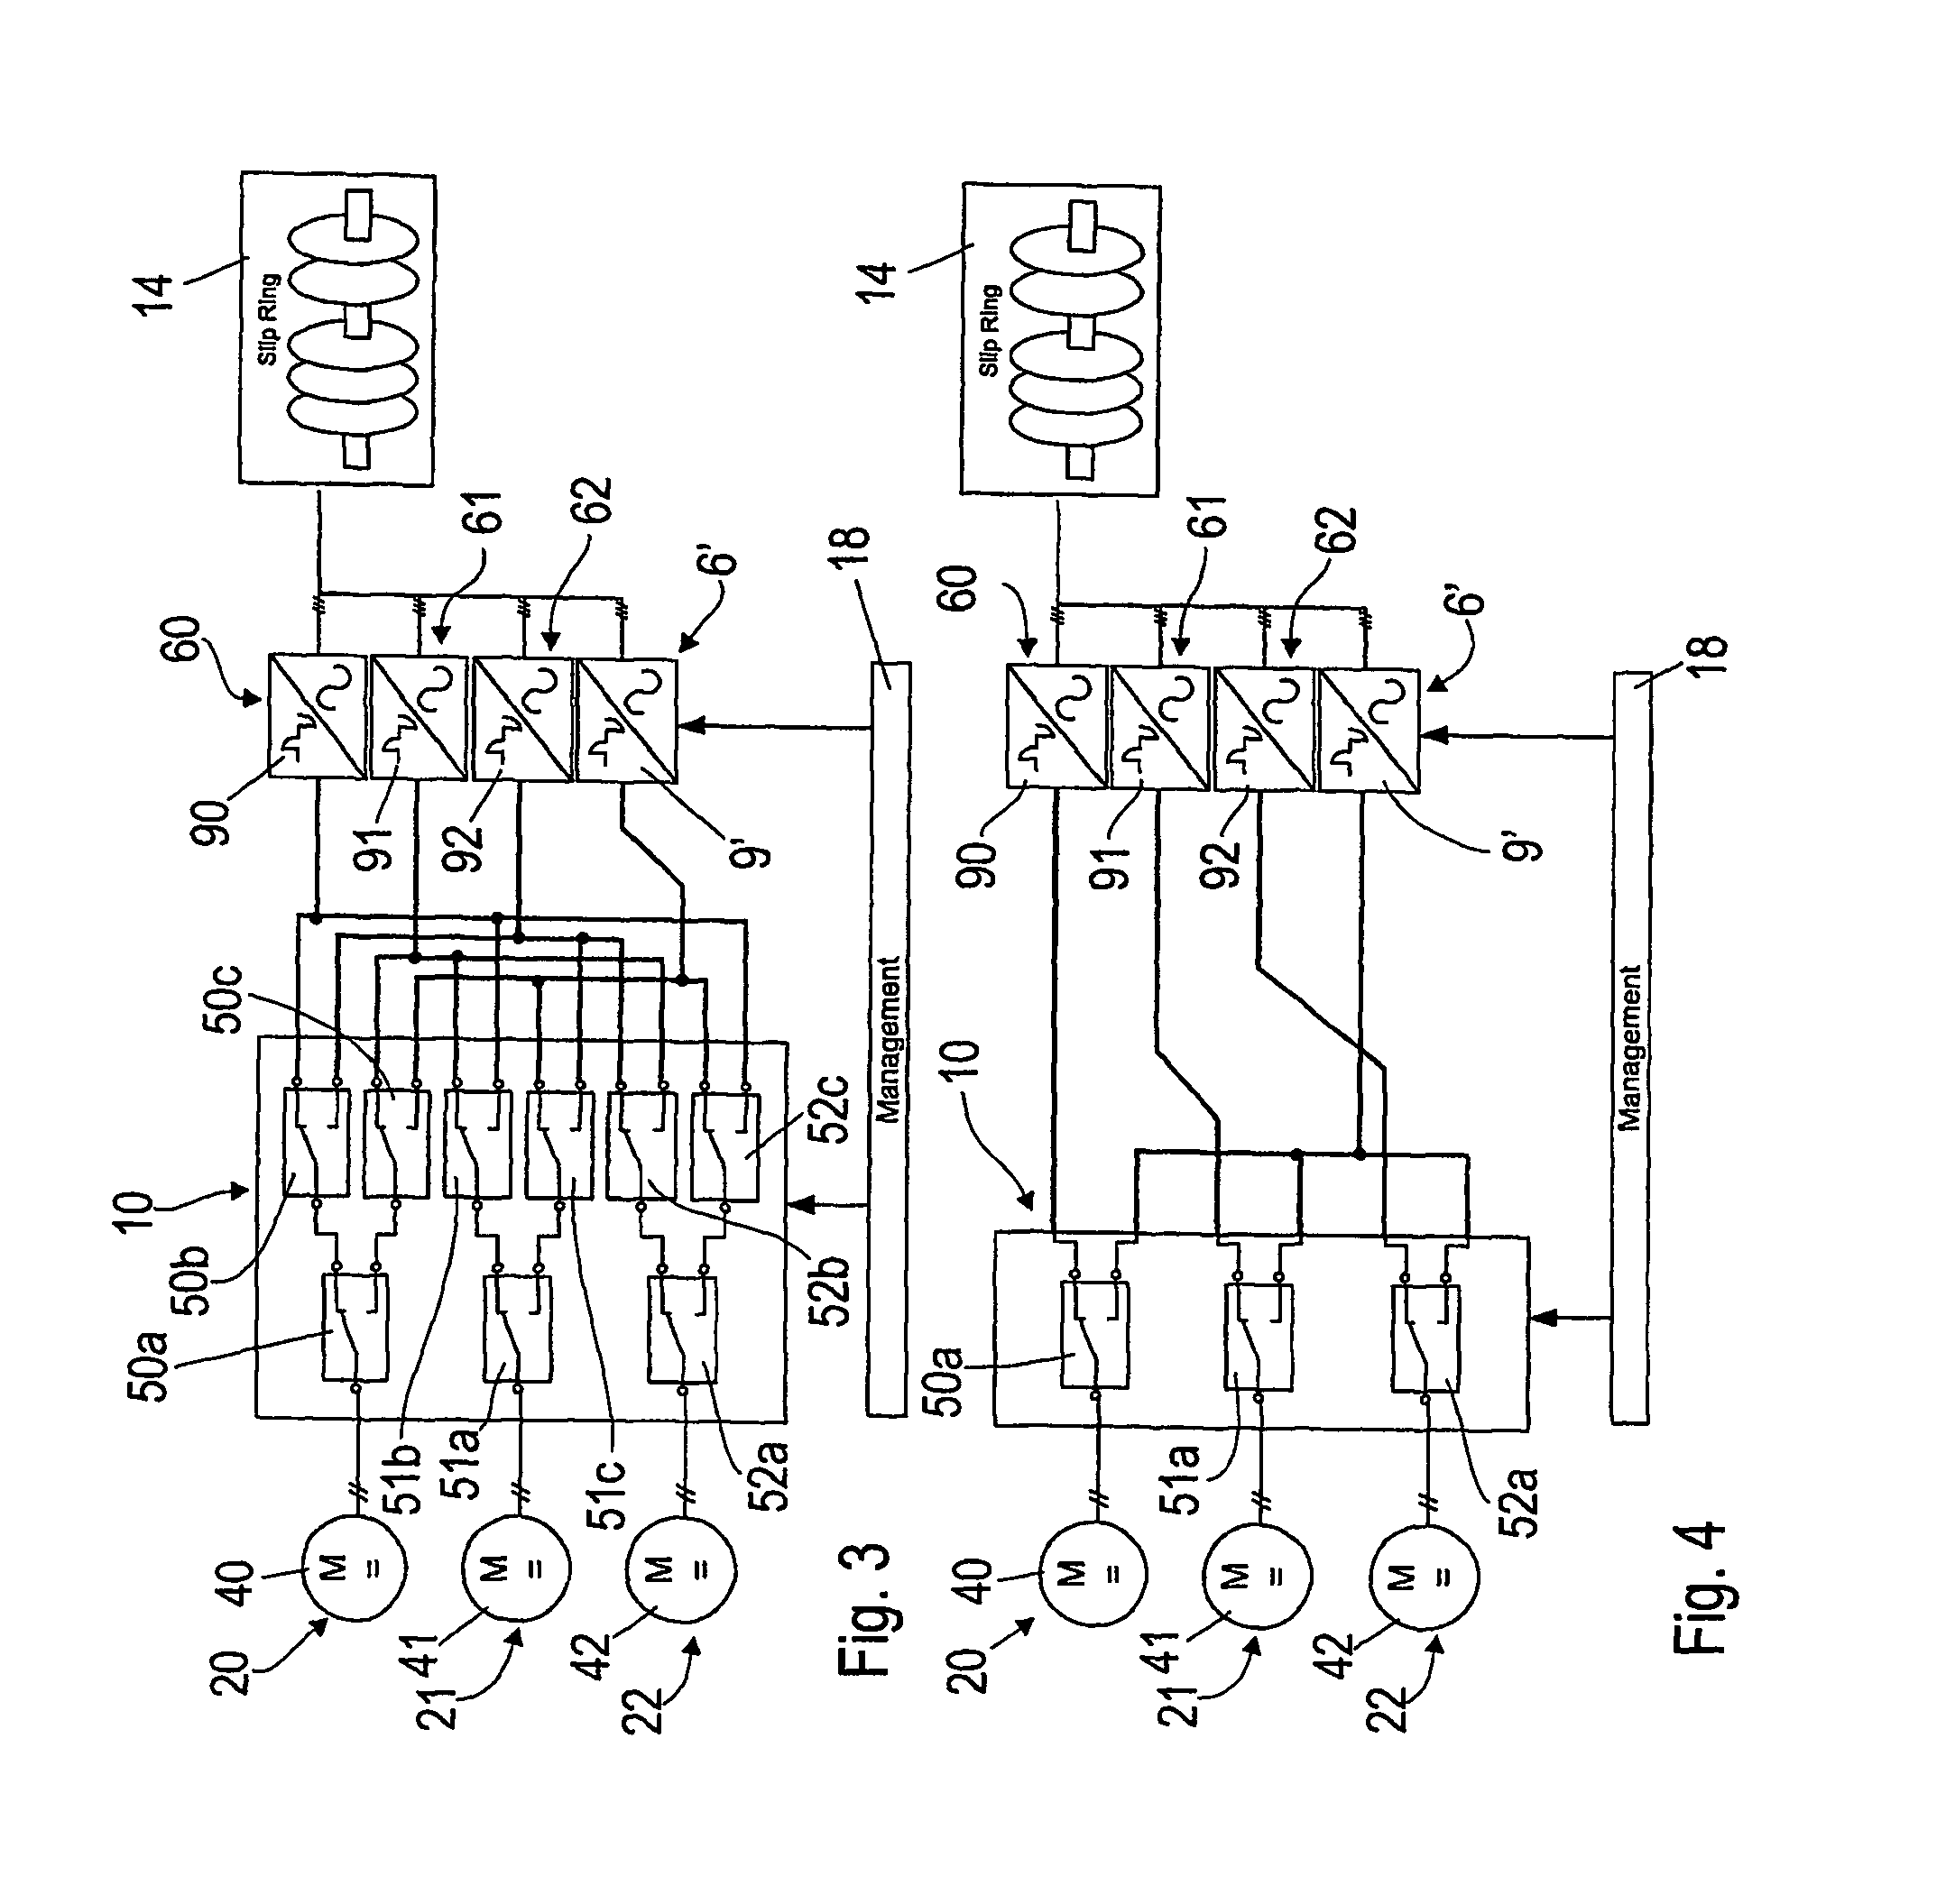 Redundant blade pitch control system for a wind turbine and method for controlling a wind turbine